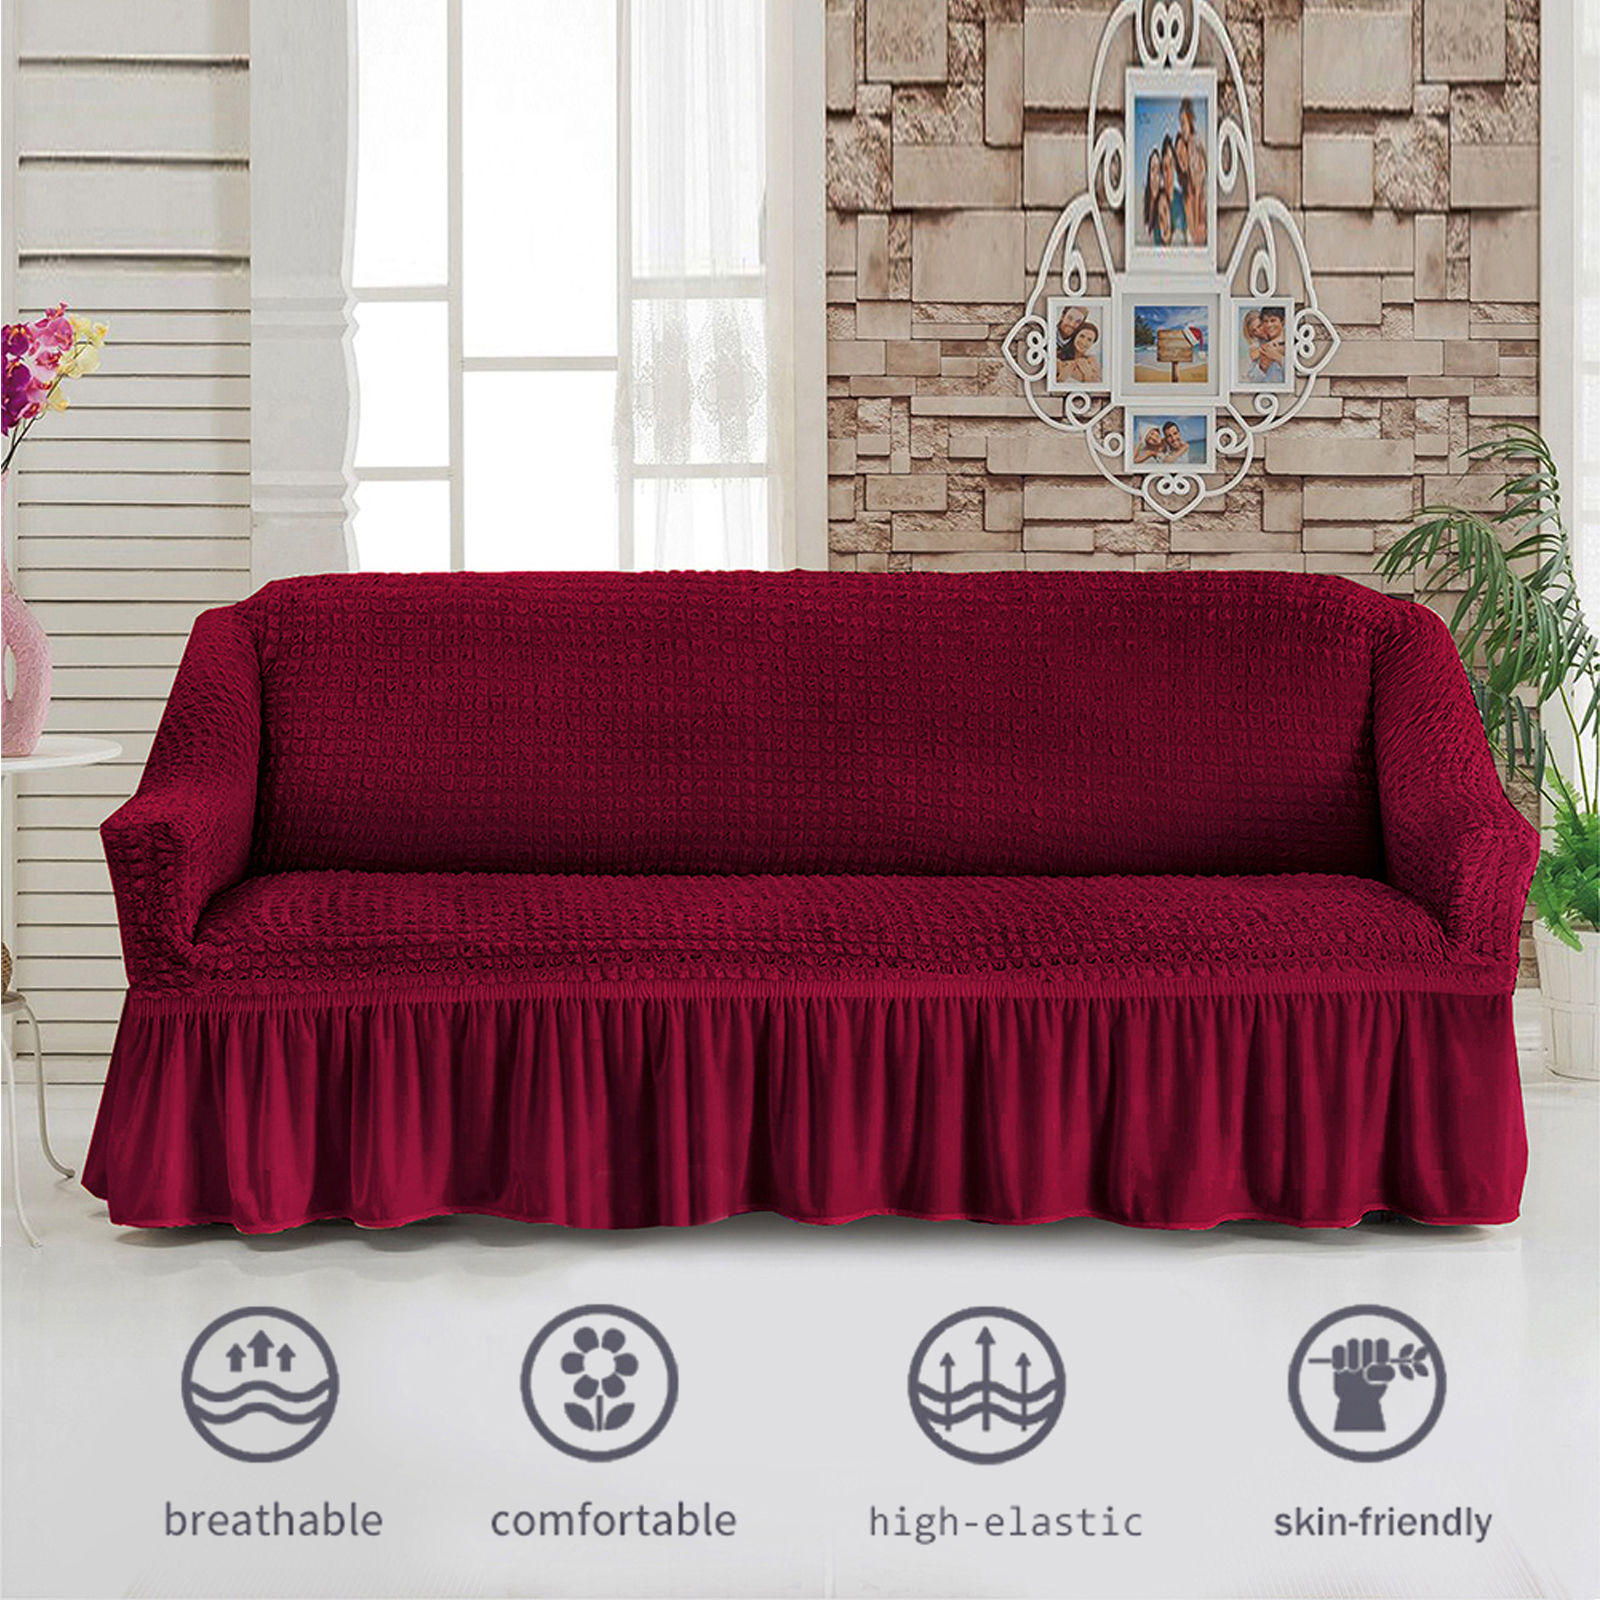 Stretch Sofa Slipcover, 3 Seater Sofa Slipcovers With Skirt With Armless Soft Sofa Cover Elastic Straps Sofa Slipcover For Living Room Kids Pets-red-Small